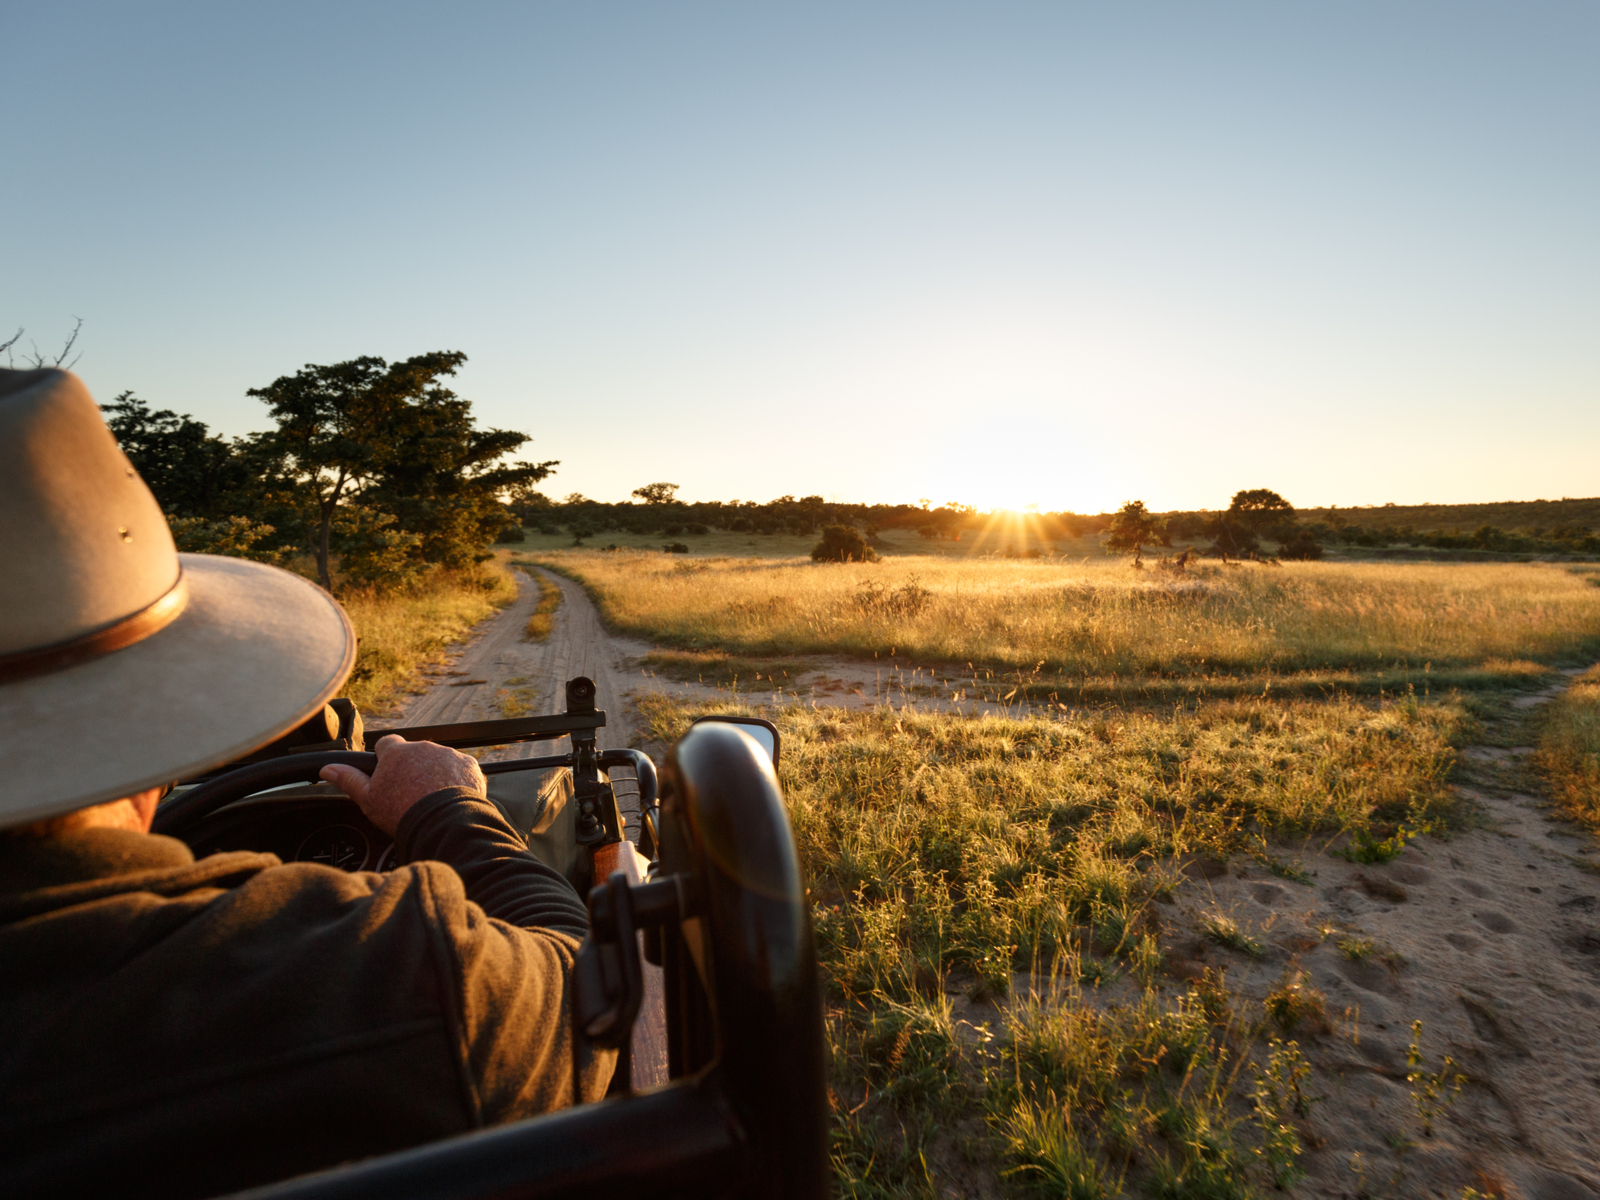 View from a classical and restored safari vehicle at the Sabi Sand Game Reserve